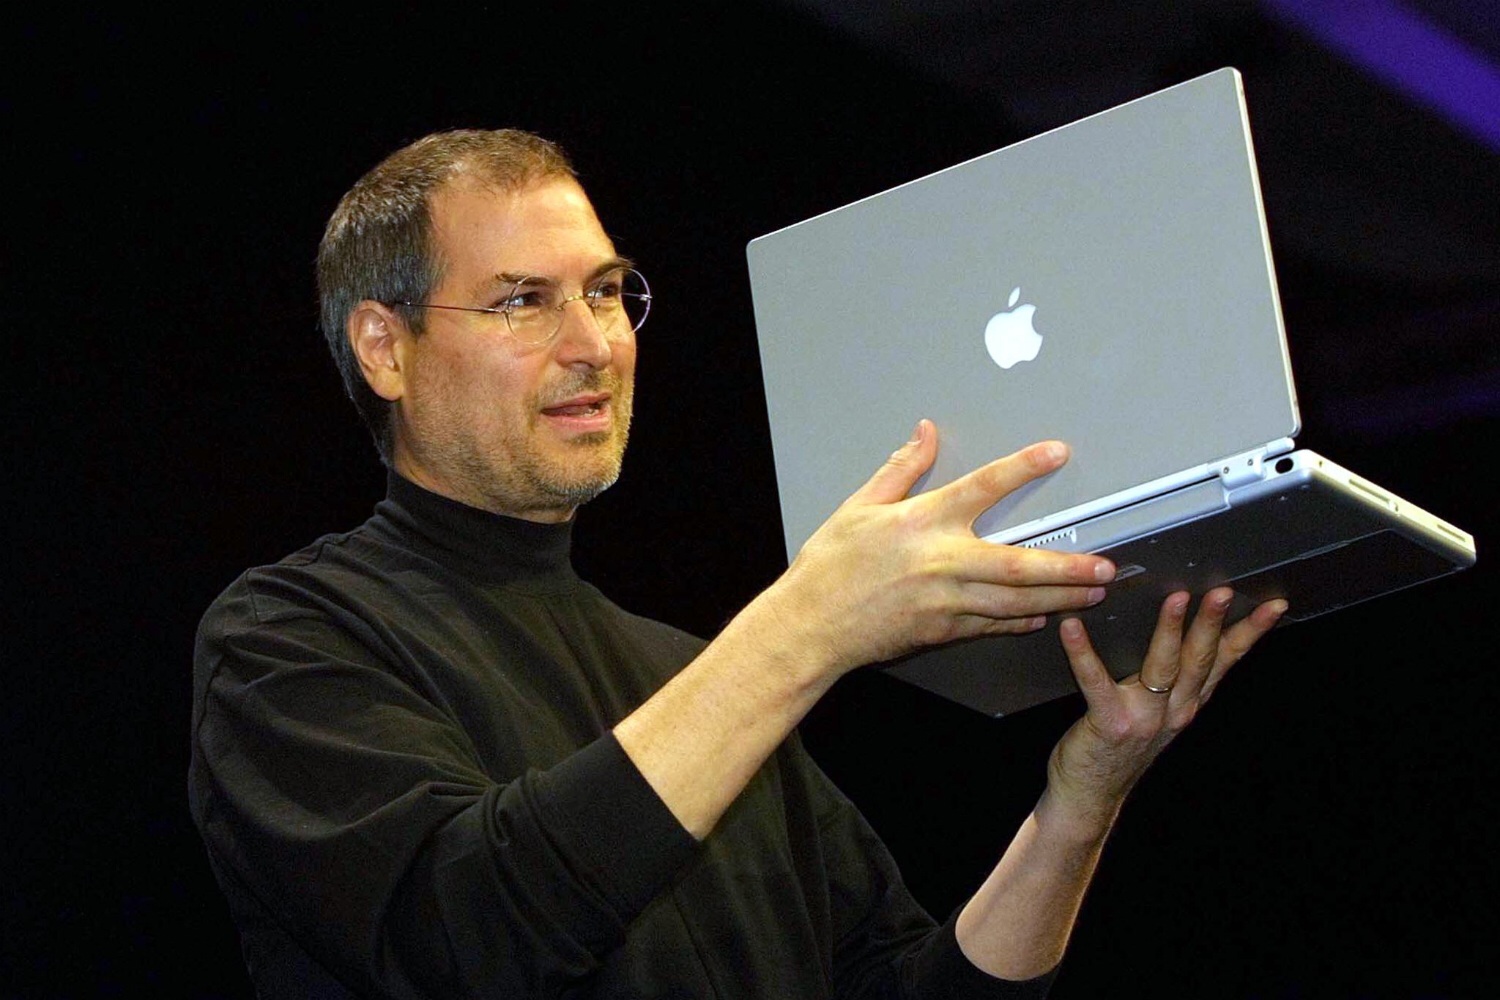 Steve Jobs shows off Apple's PowerBook G4 at Macworld Expo in San Francisco on January 9, 2001 (John G. Mabanglo—AFP/Getty Images)